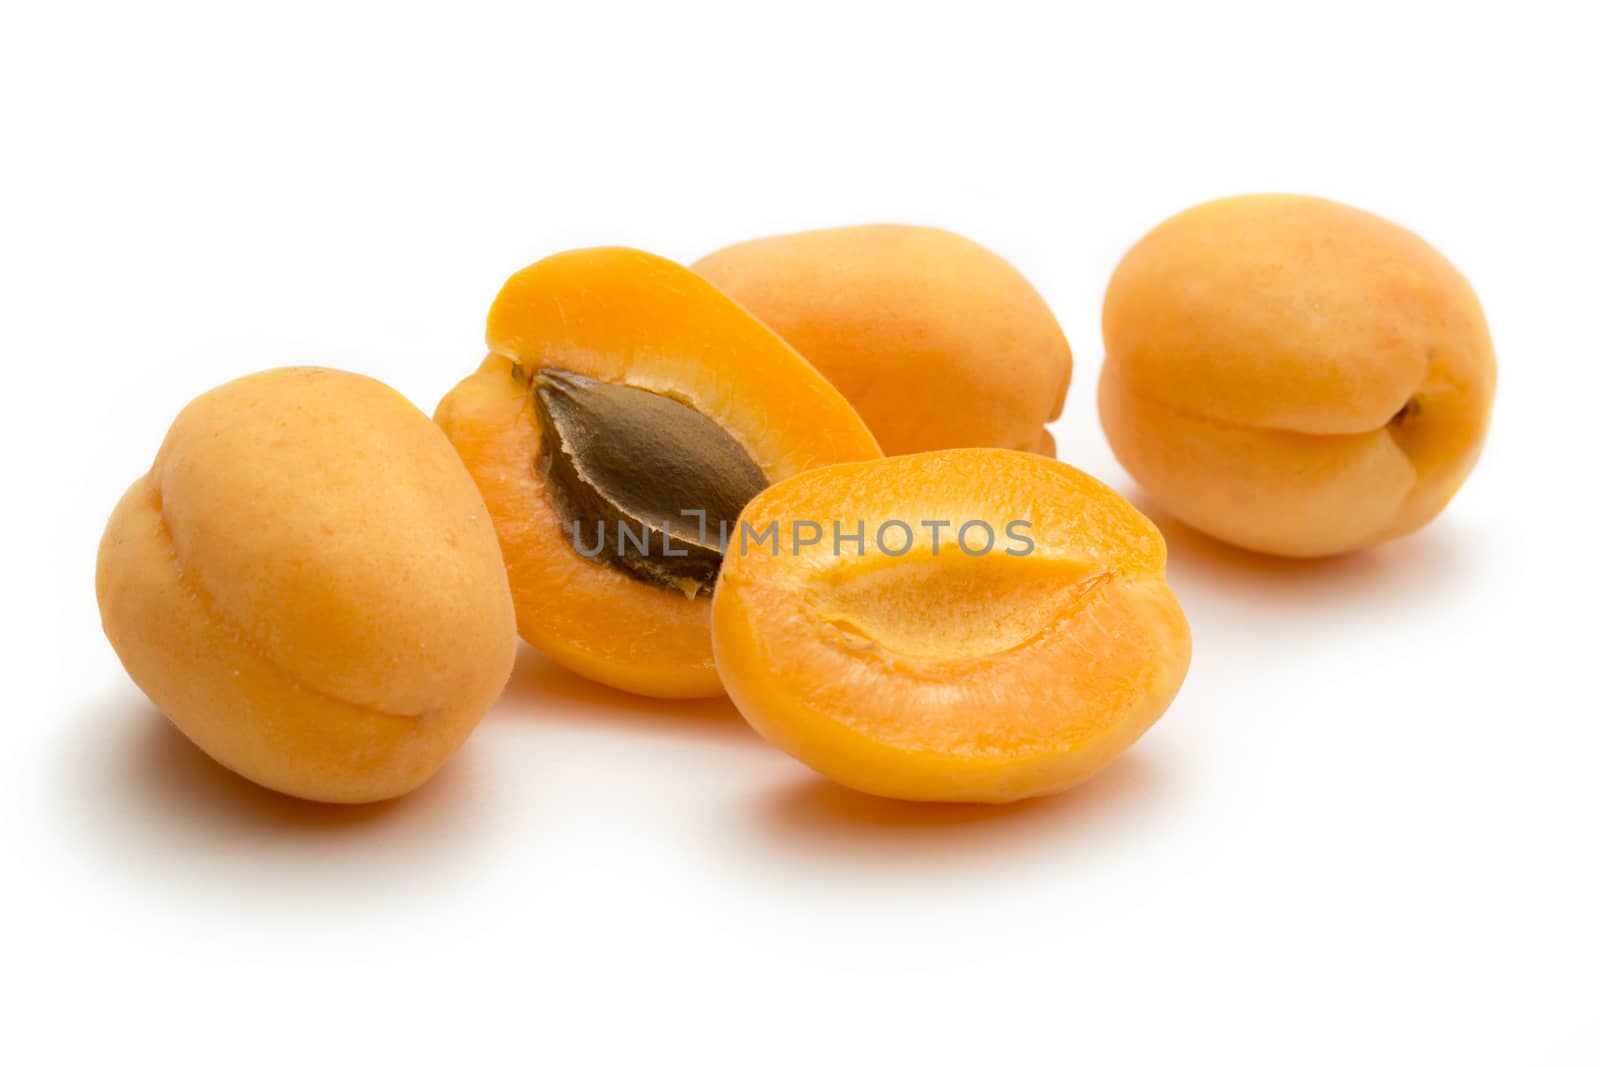 Ripe apricots on white background